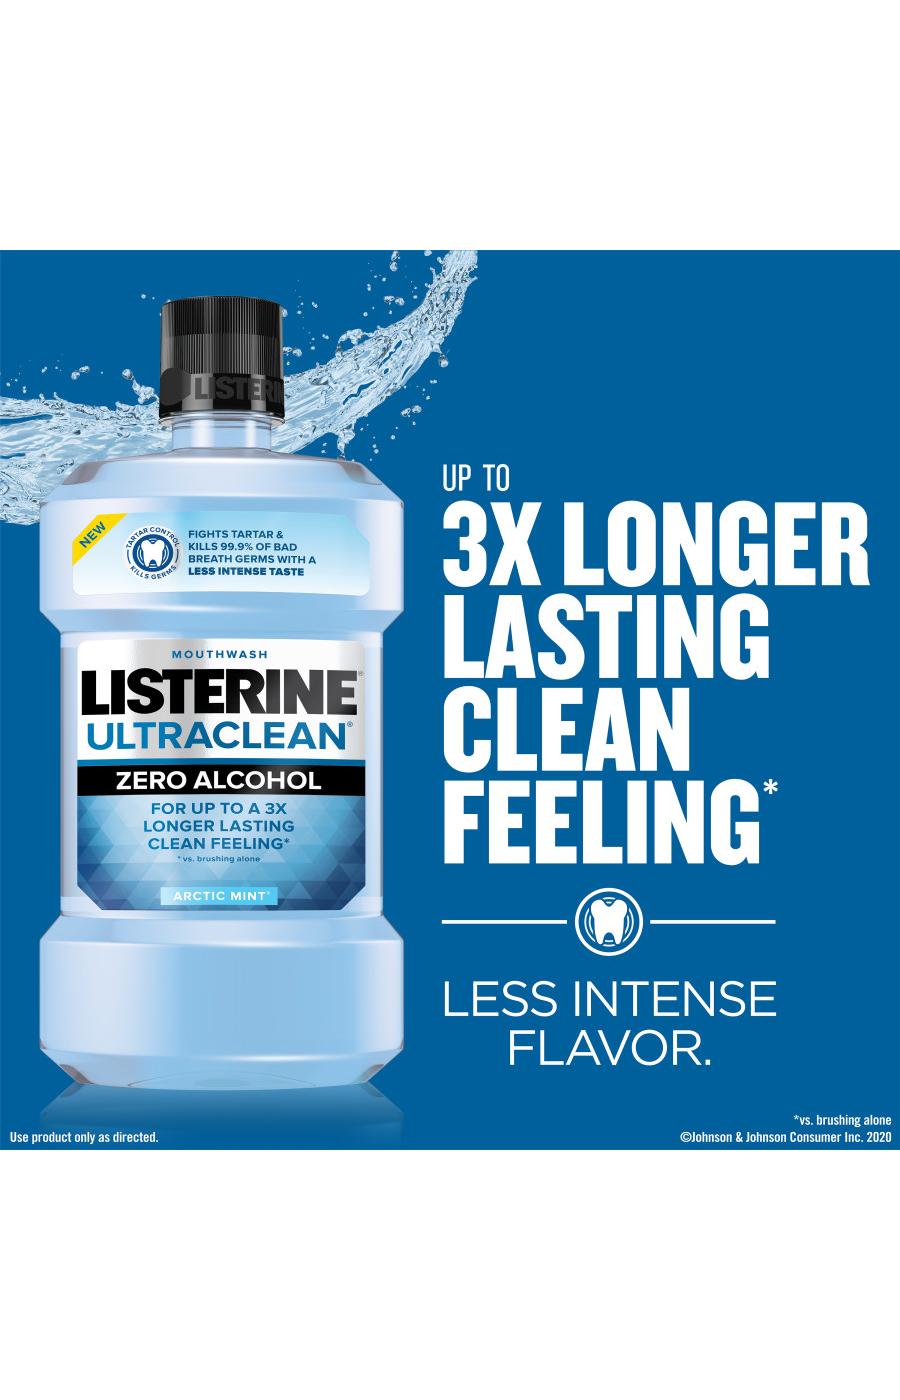 Listerine Antiseptic Mouthwash with Alcohol, Oral Care, Cool Mint